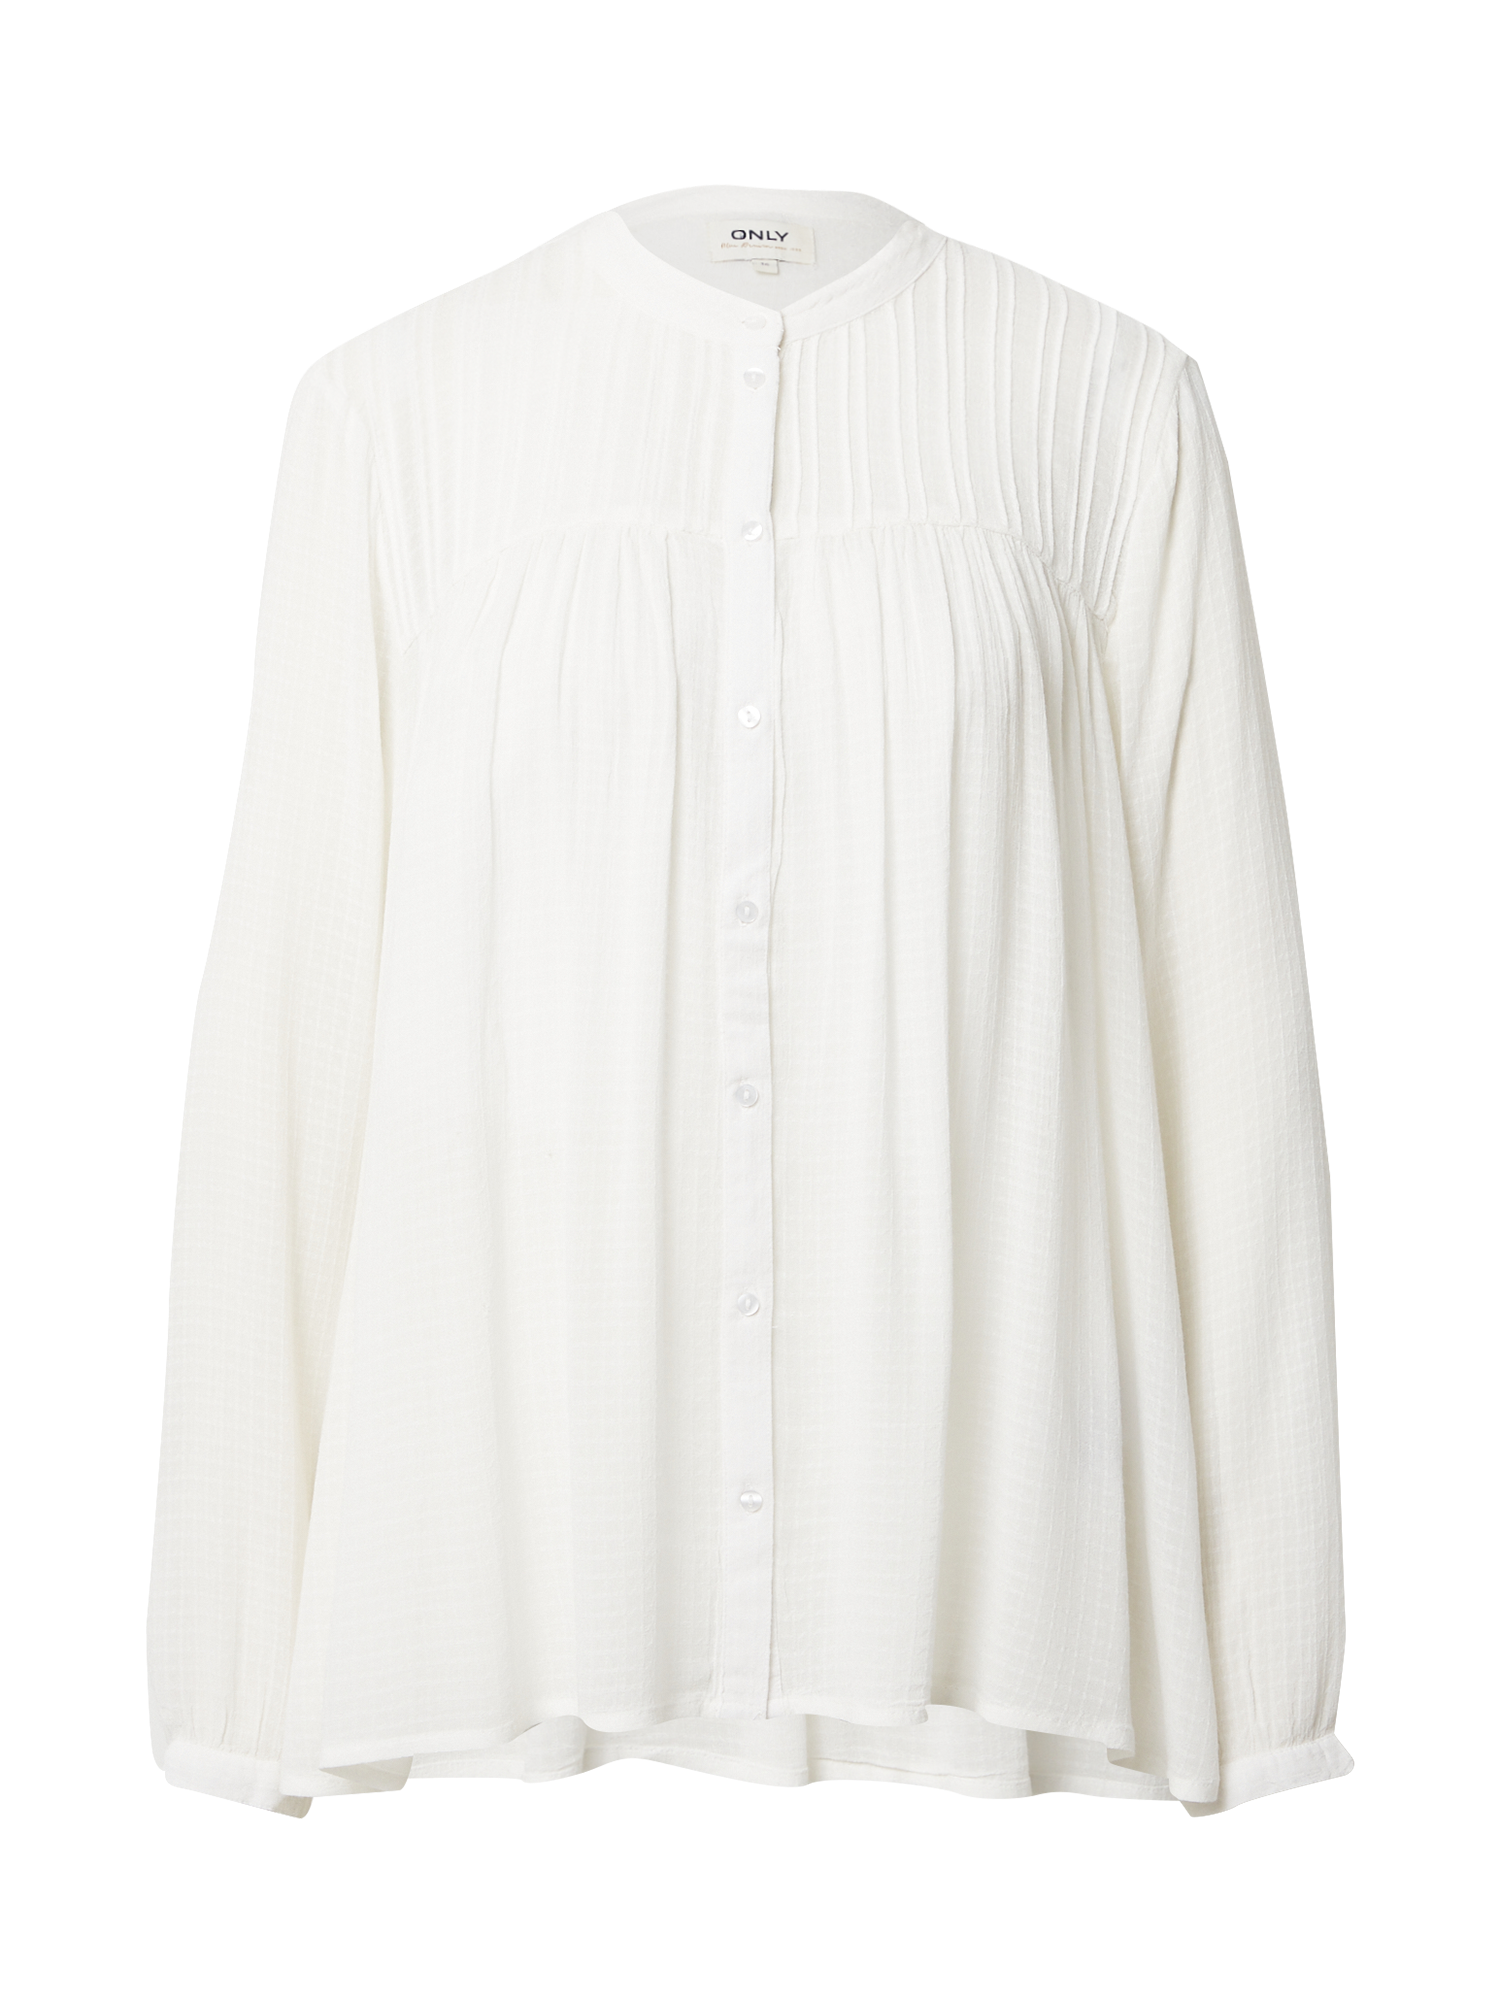 yYH10 Donna ONLY Camicia da donna NEW FLOW in Bianco 